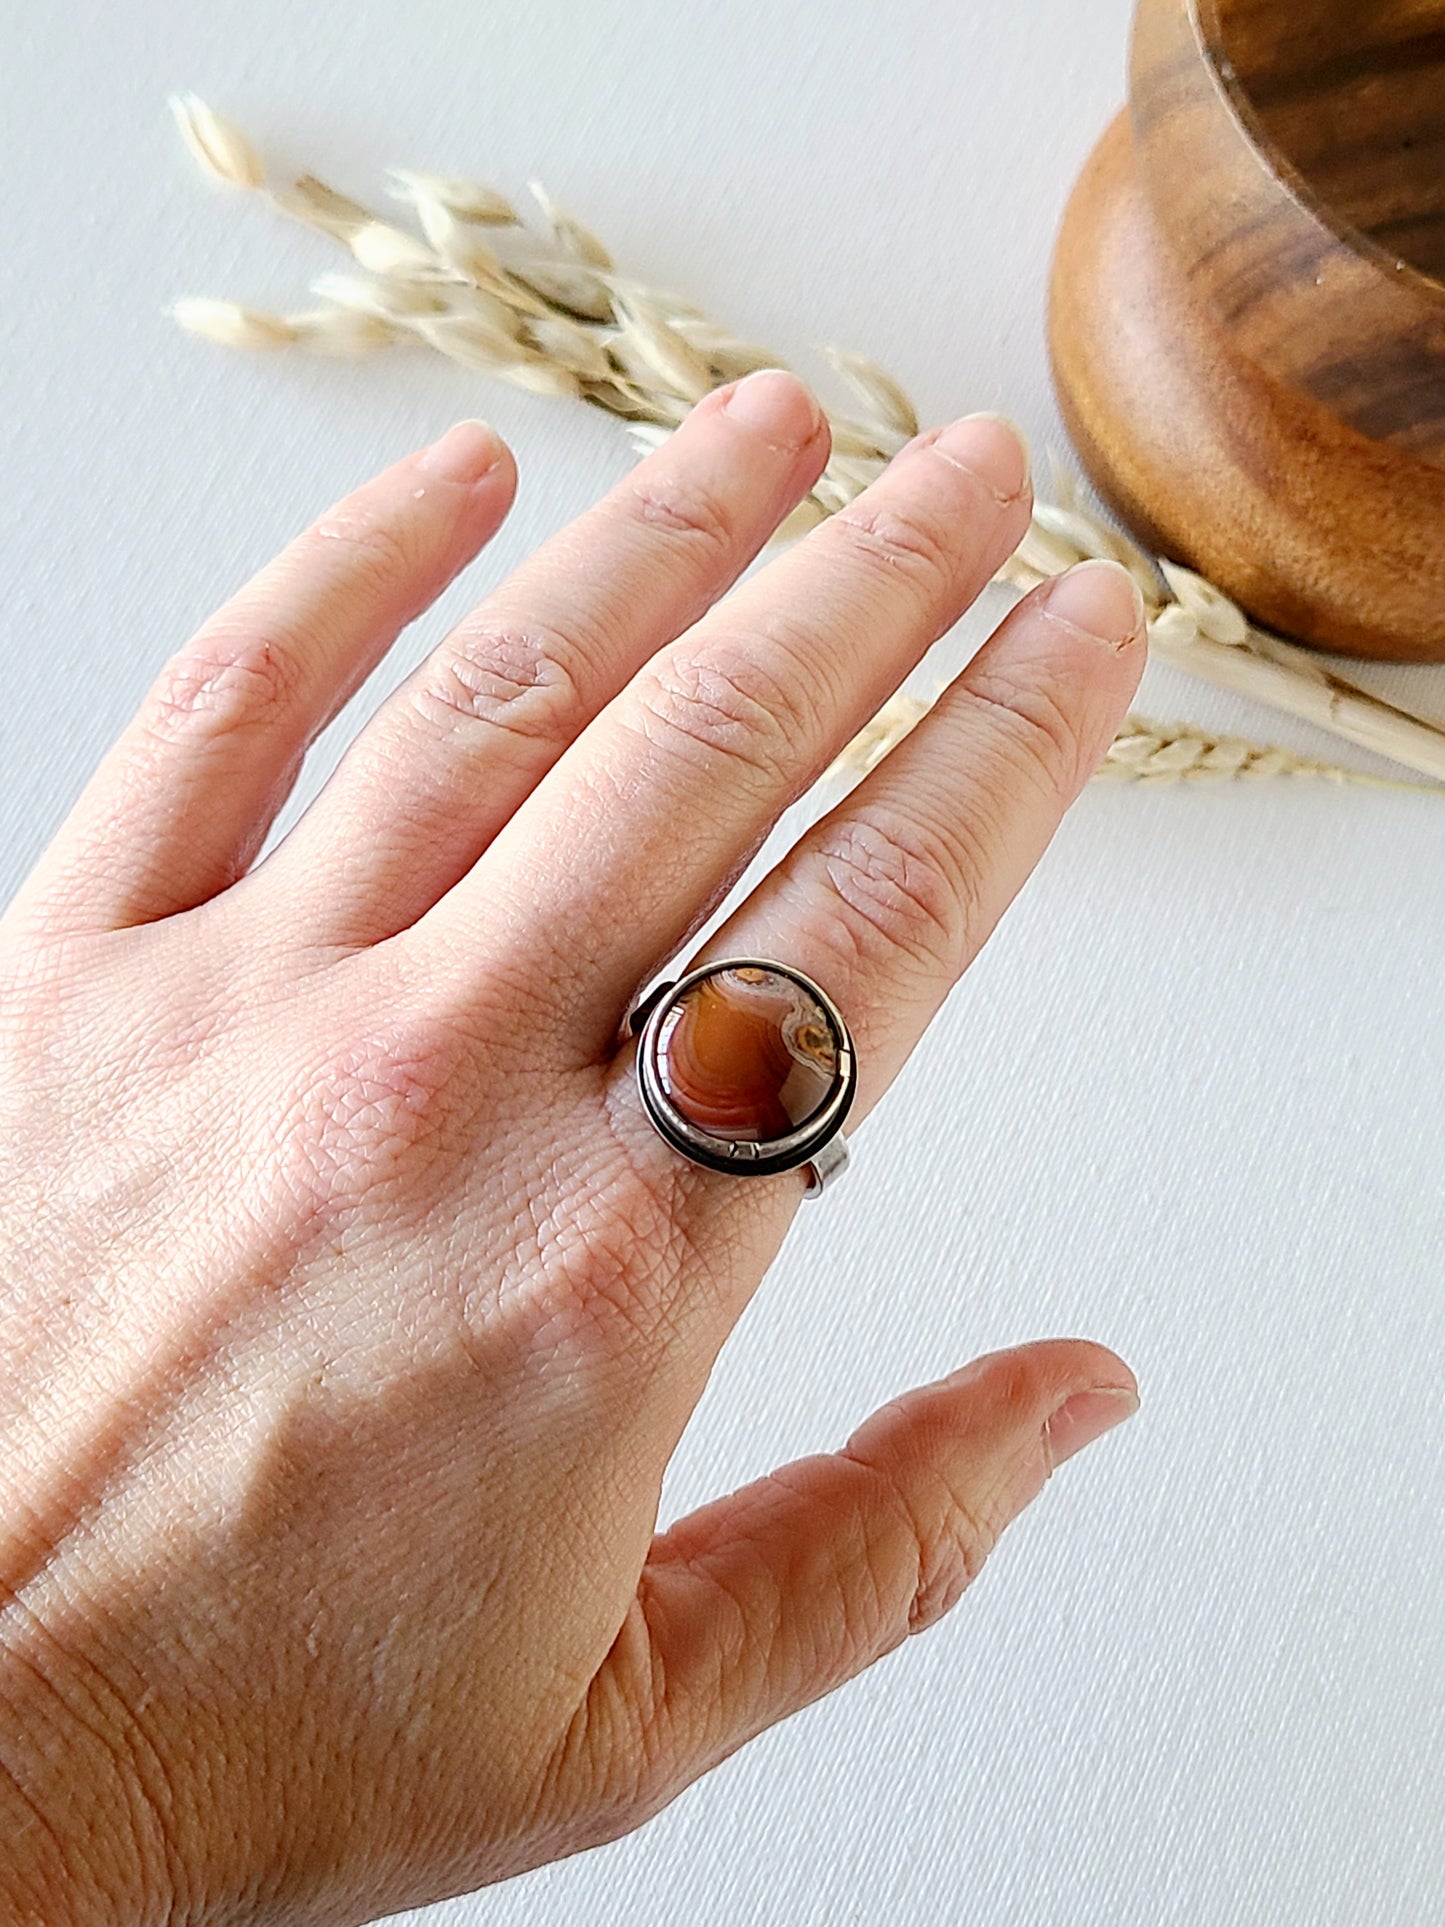 Agate and Sterling silver ring-round red laguna lace agate 9.25 US